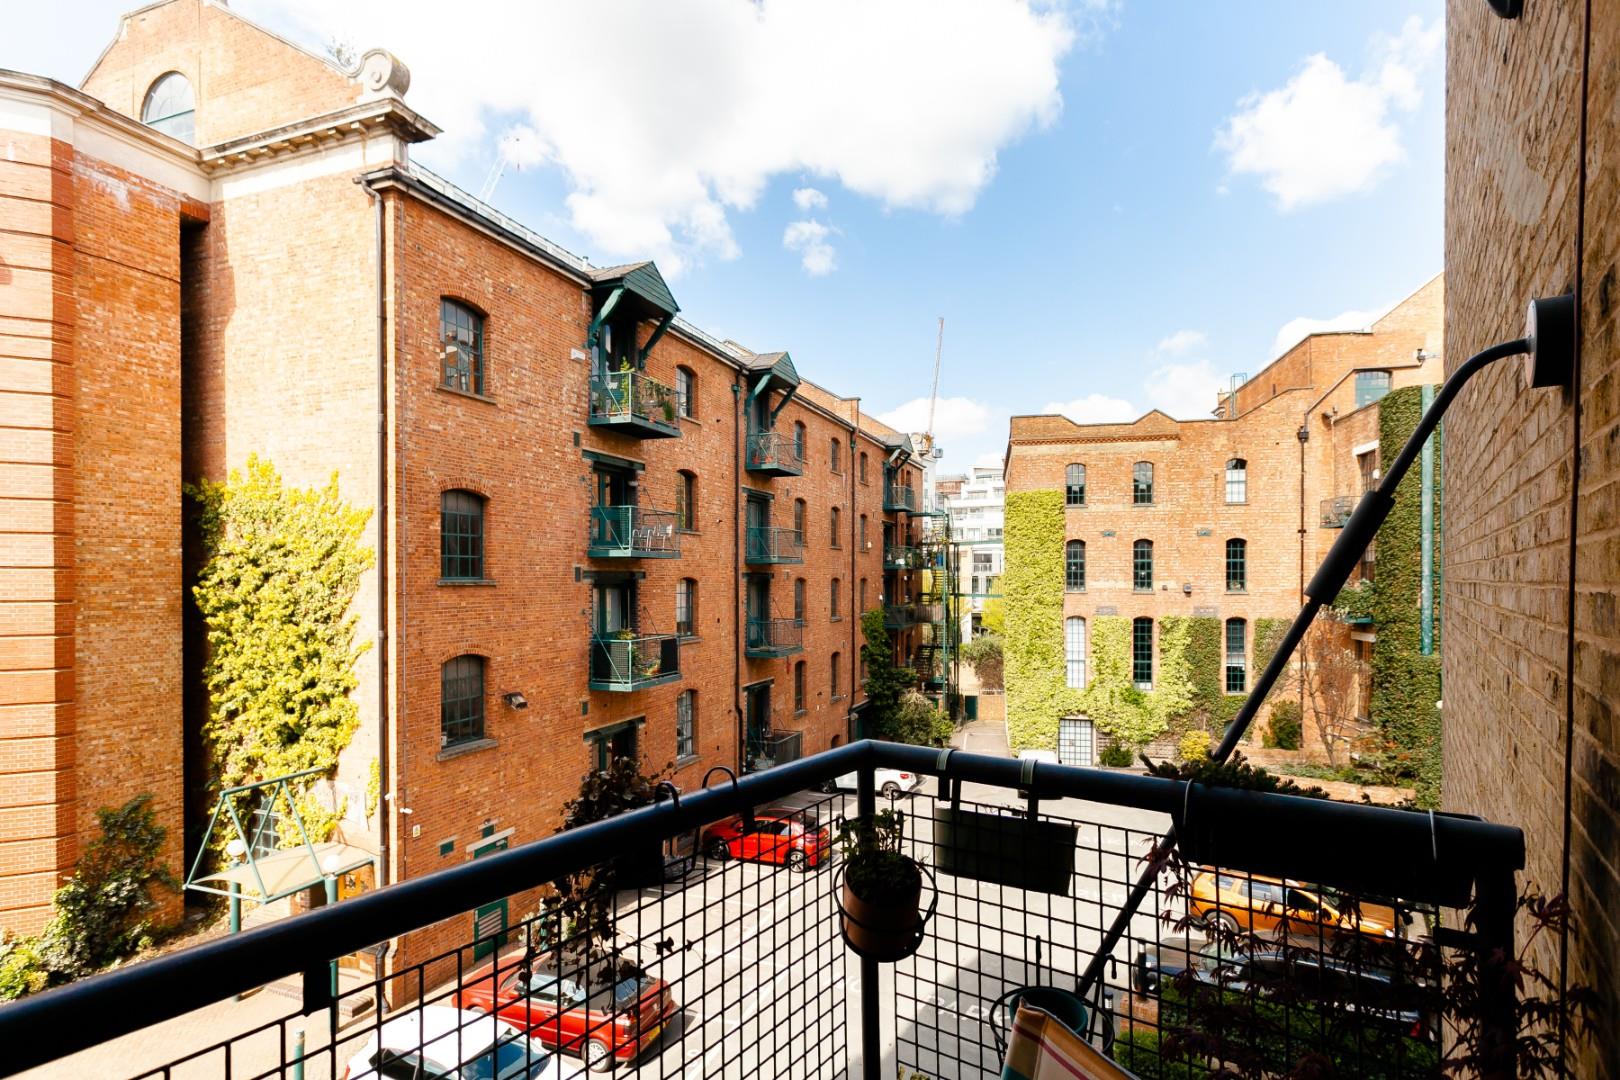 Similar Property: Flat - Conversion in Limehouse